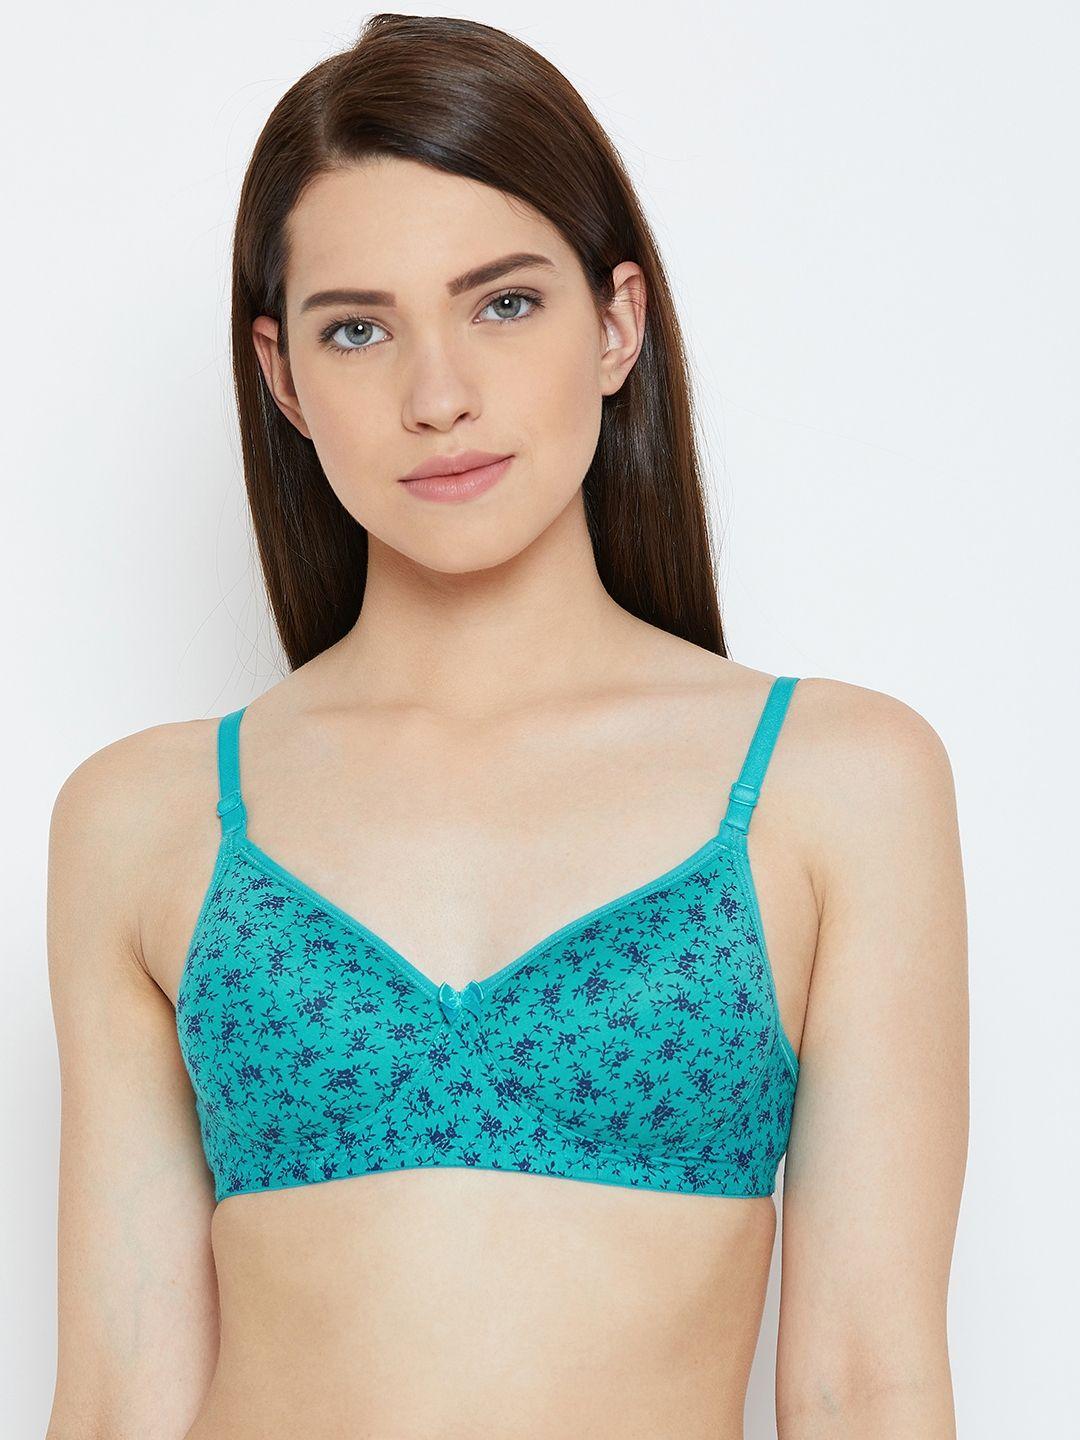 Lady Lyka Blue Printed Non-Wired Lightly Padded T-shirt Bra HAPPY-MOODS